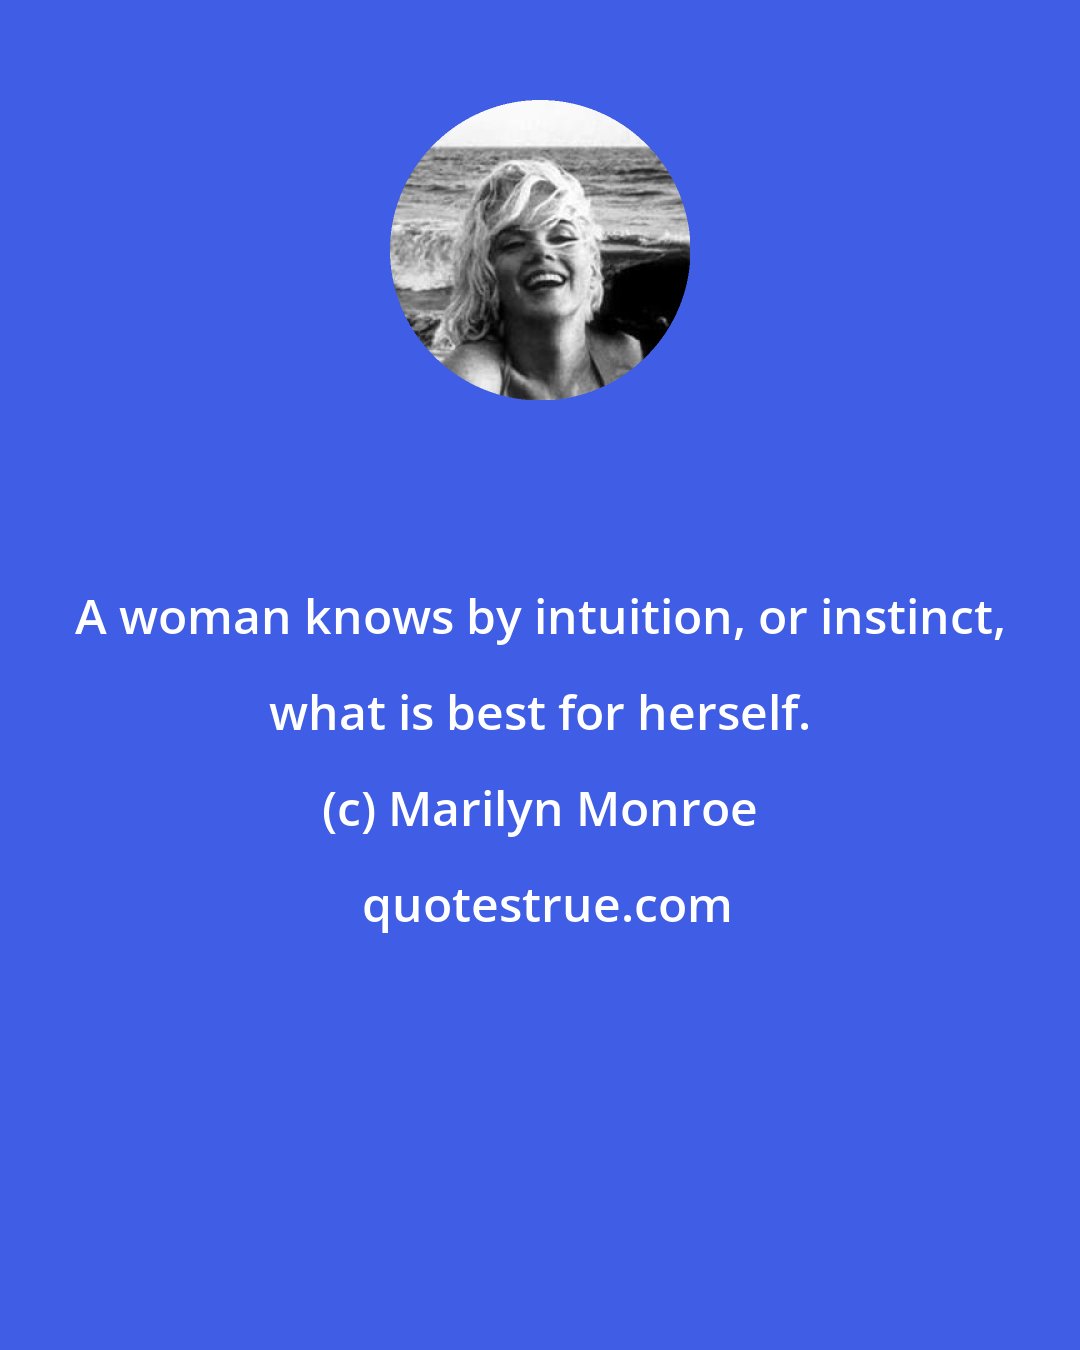 Marilyn Monroe: A woman knows by intuition, or instinct, what is best for herself.